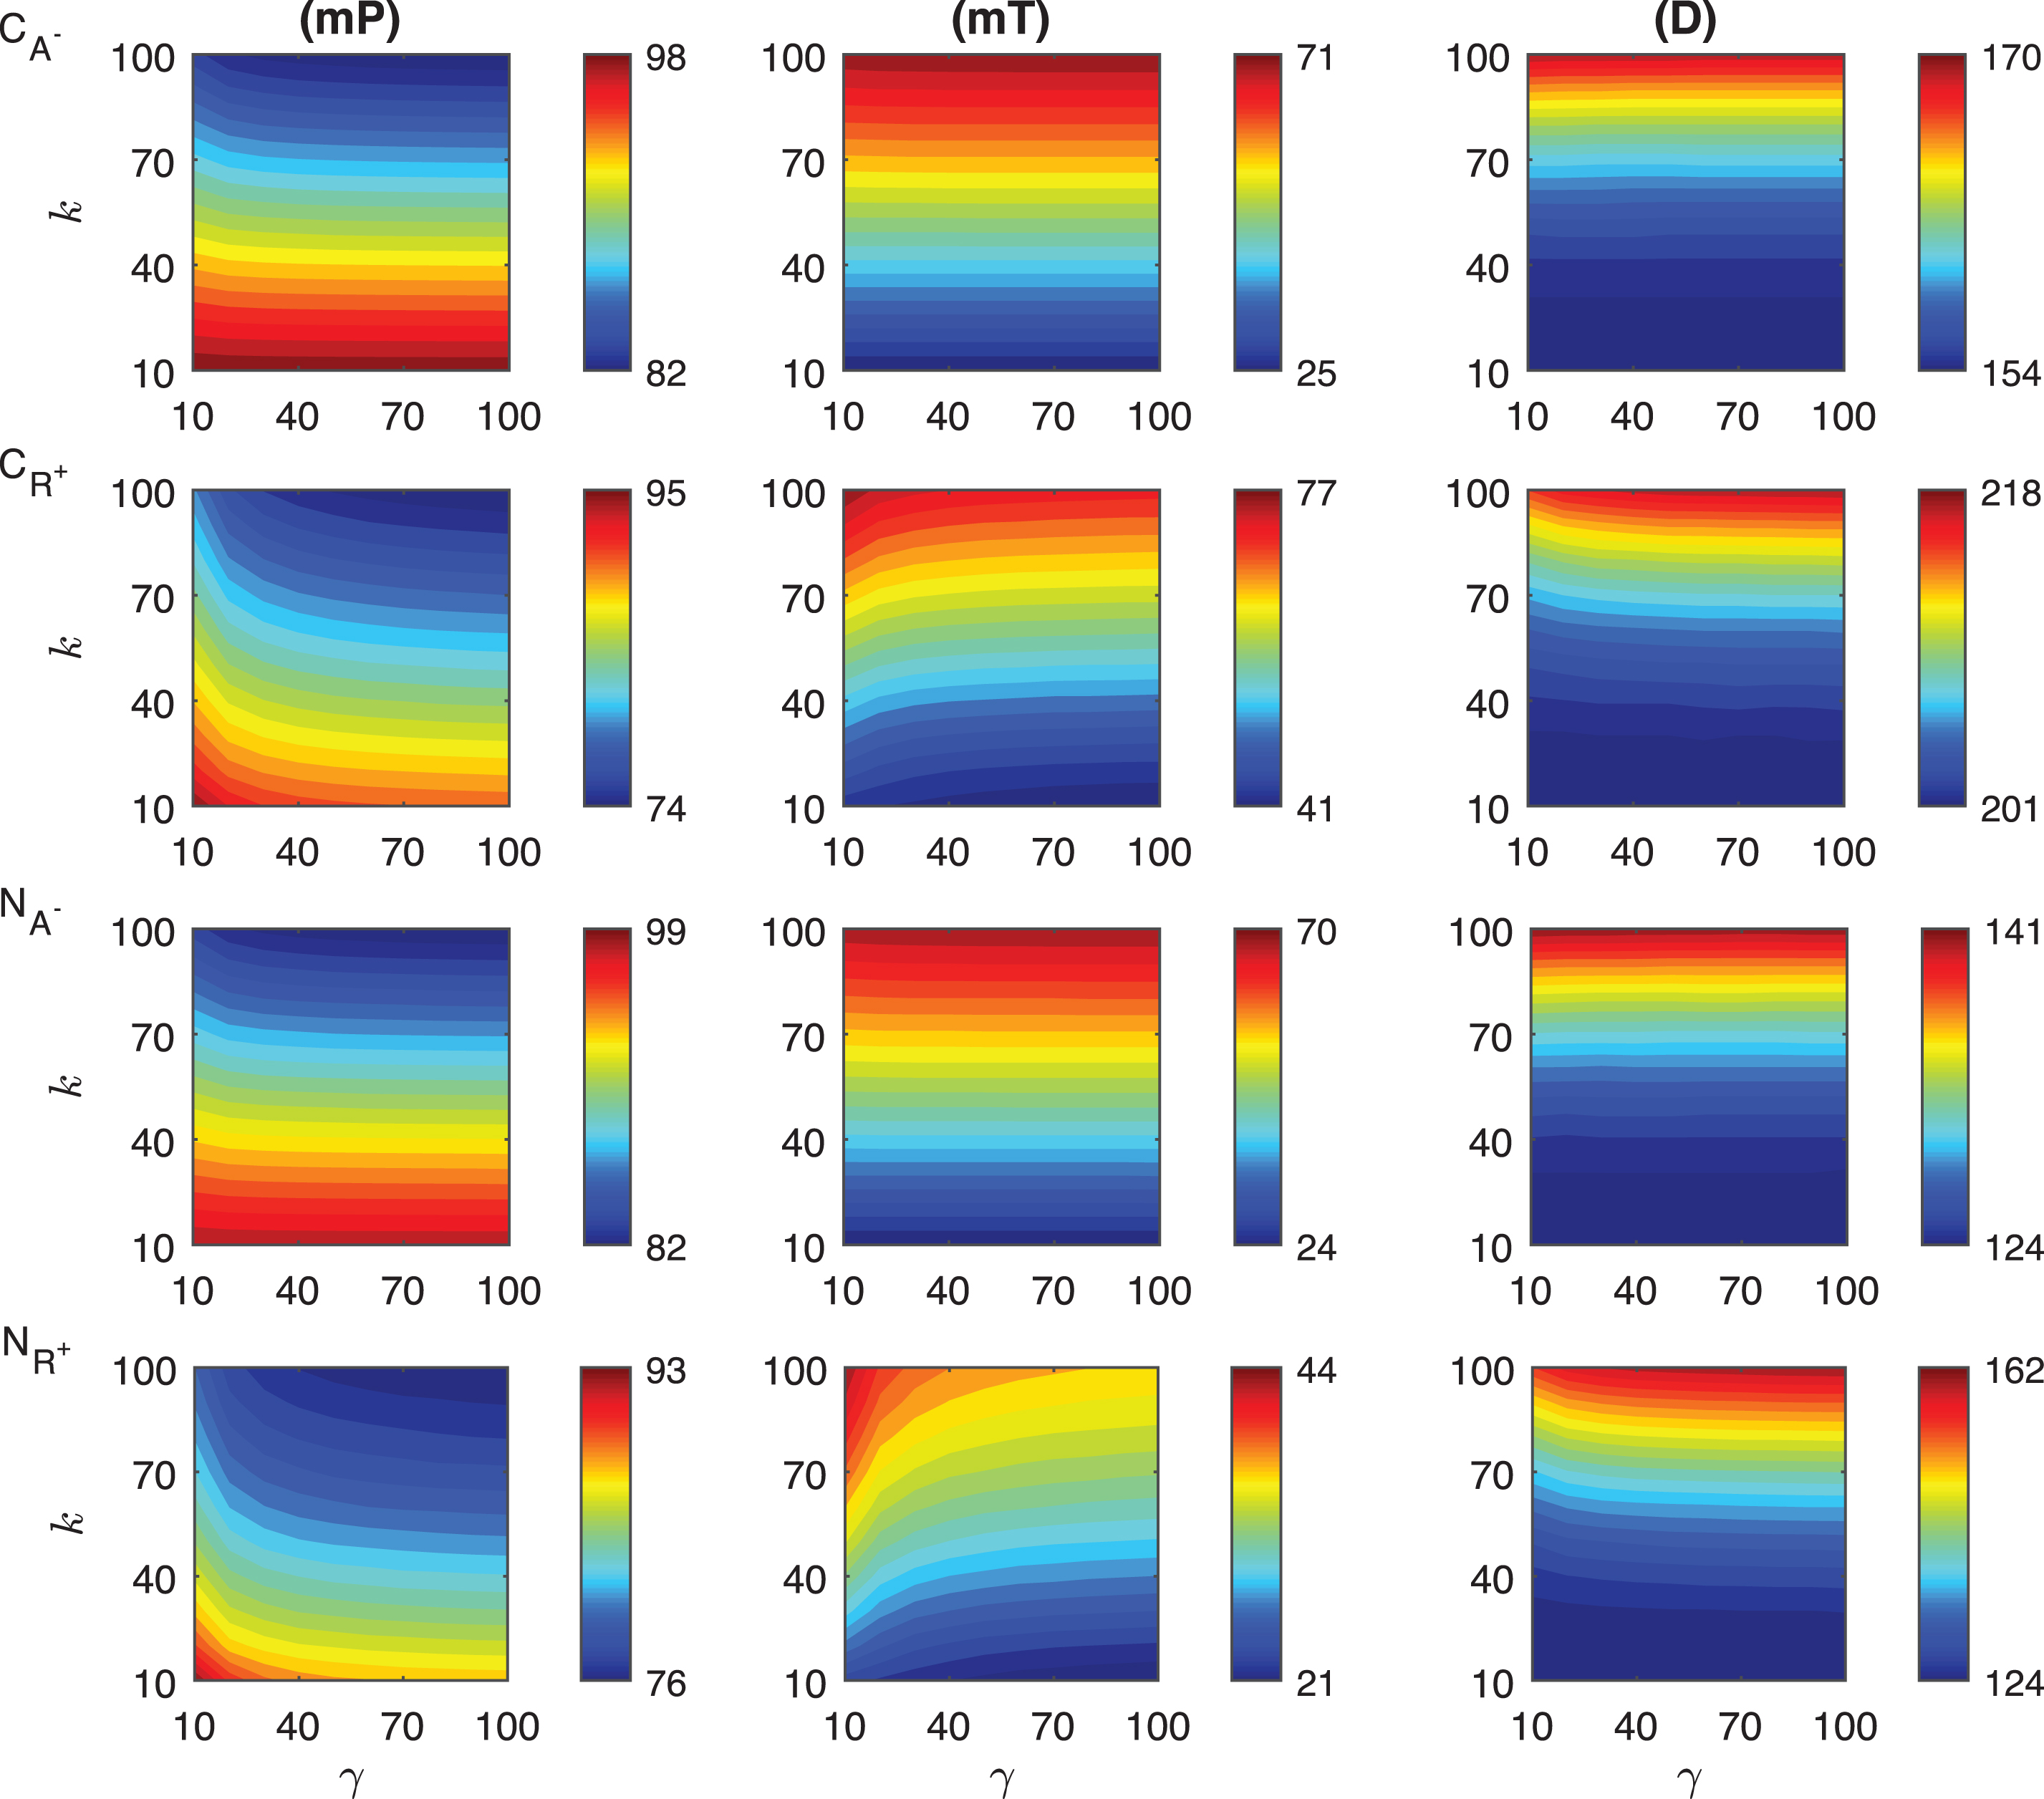 Heat maps for the comparison of three metrics (mid-protein level mP, time to reach mid-protein level mT and duration D) describing the dynamics of competitive (CA−, CR+) and noncompetitive (NA−, NR+) inhibition mechanisms. In these simulations, the signal amplitude γ and persistency k range from a 10-fold to a 100-fold change when ro = 10−4. All the other parameters were held constant at their values listed in Section 3. See text for the details.